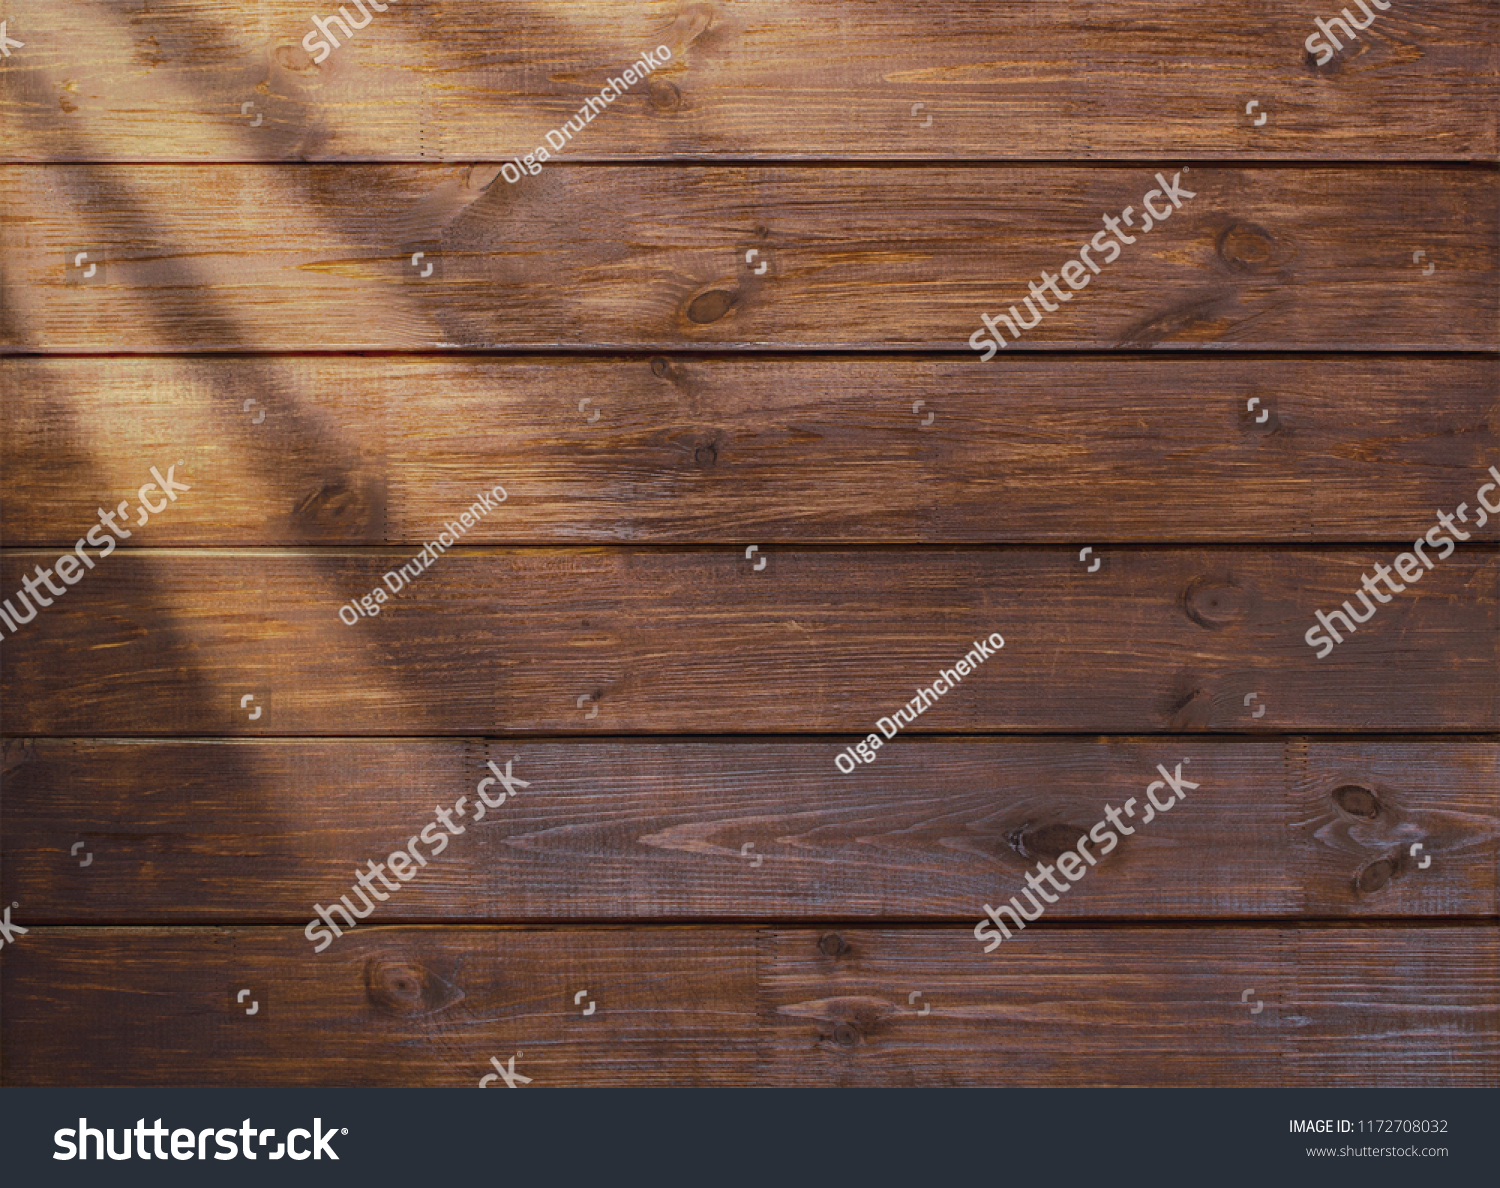 brown wooden plank desk table background texture top view #1172708032